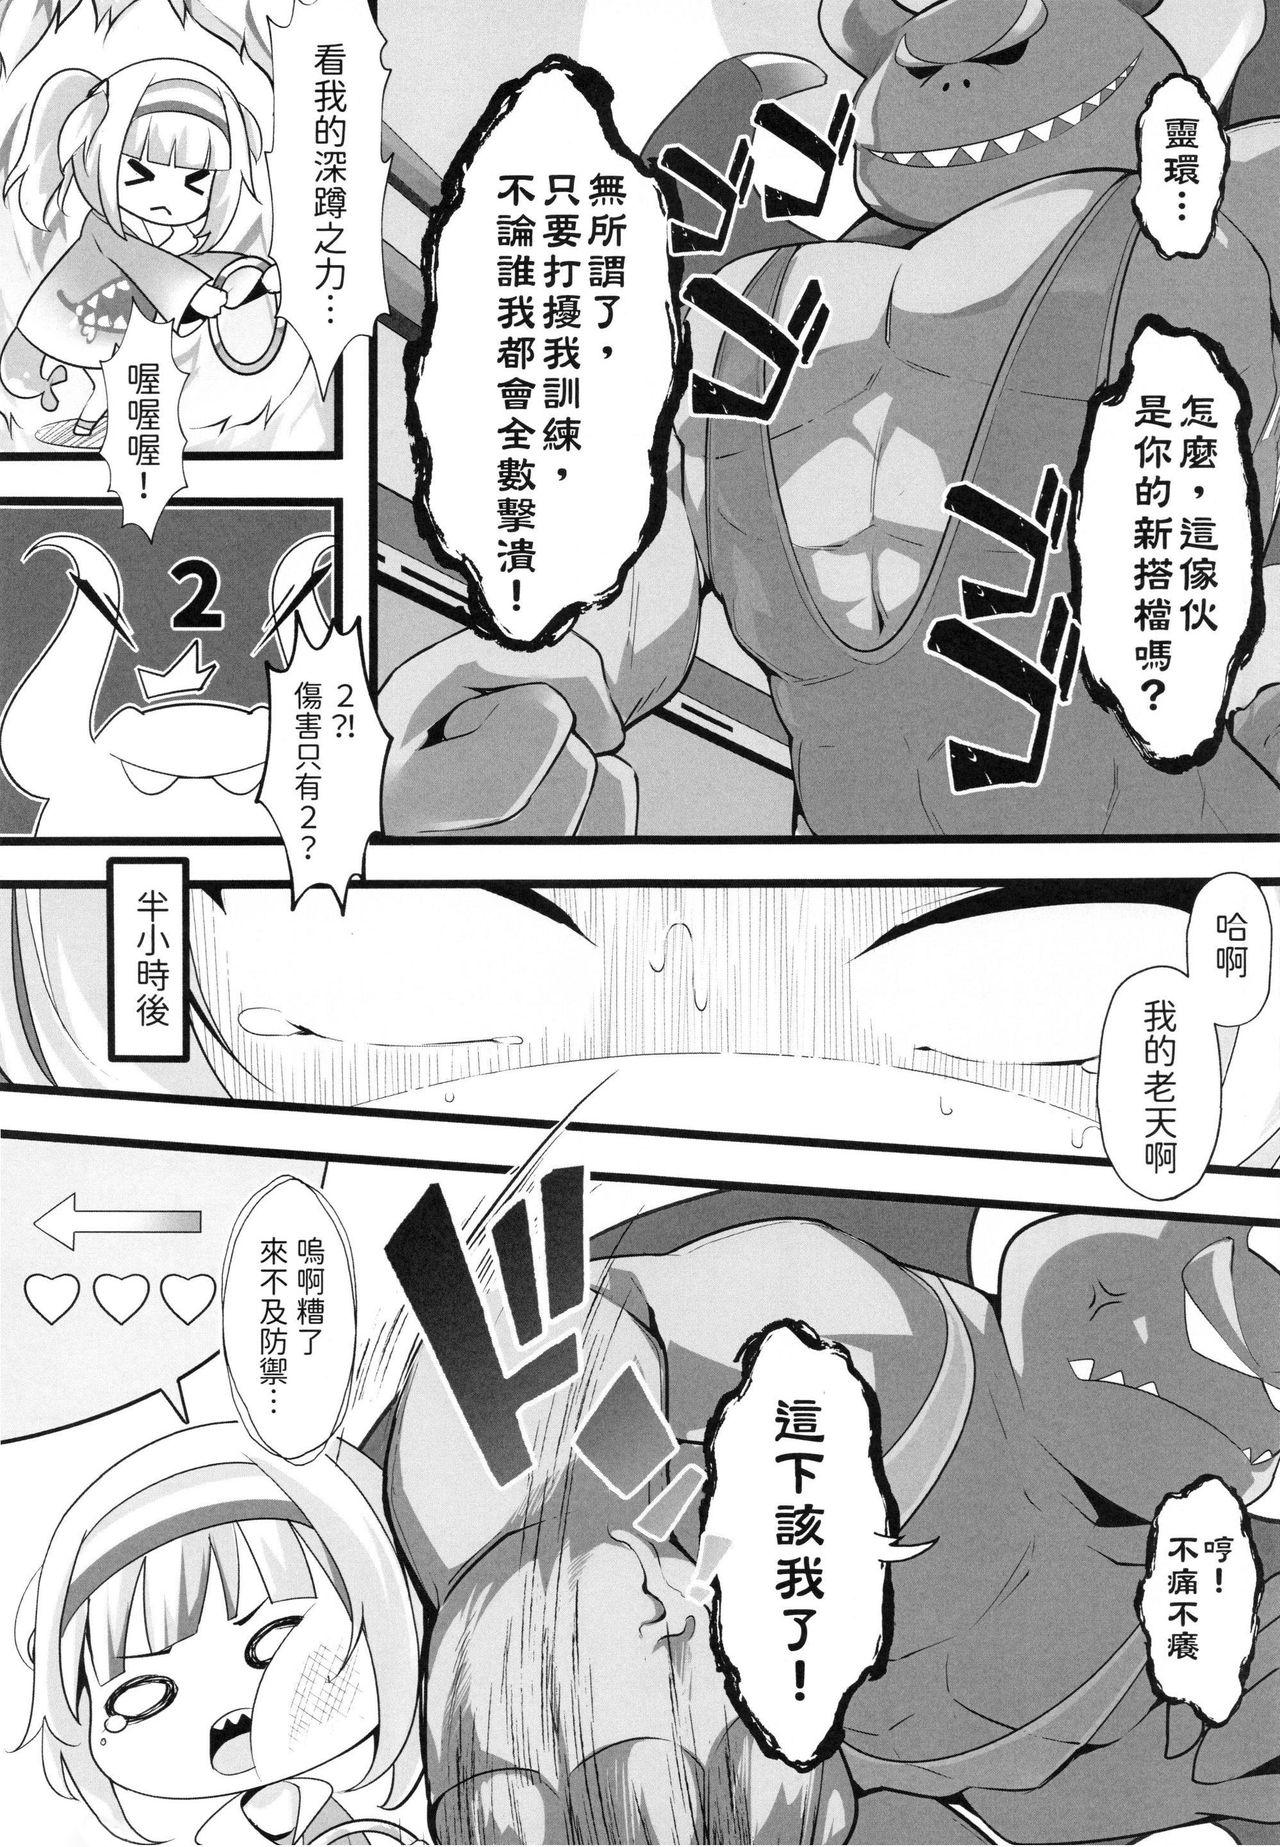 Lesbians 【台灣FF37】[ちやみ] Let's Sweat (hololive) (Gawr Gura) (Vtuber) [Chinese] [Decensored] - Hololive Ring fit adventure Blowjob - Page 5